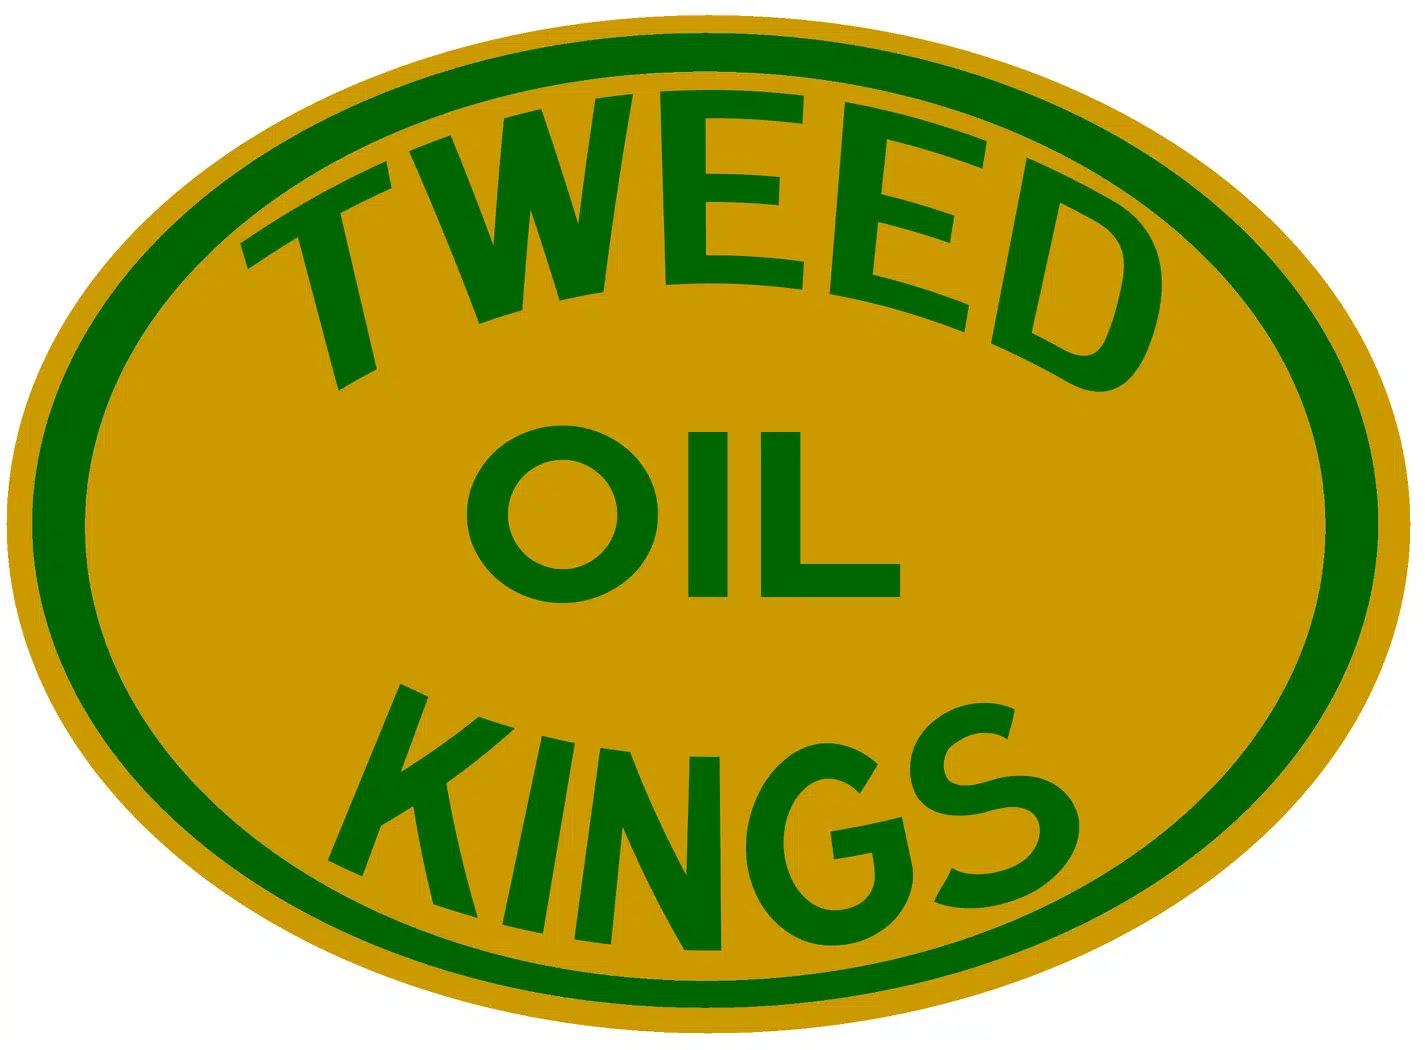 Tweed's new hockey team name pays tribute to 1975/76 championship